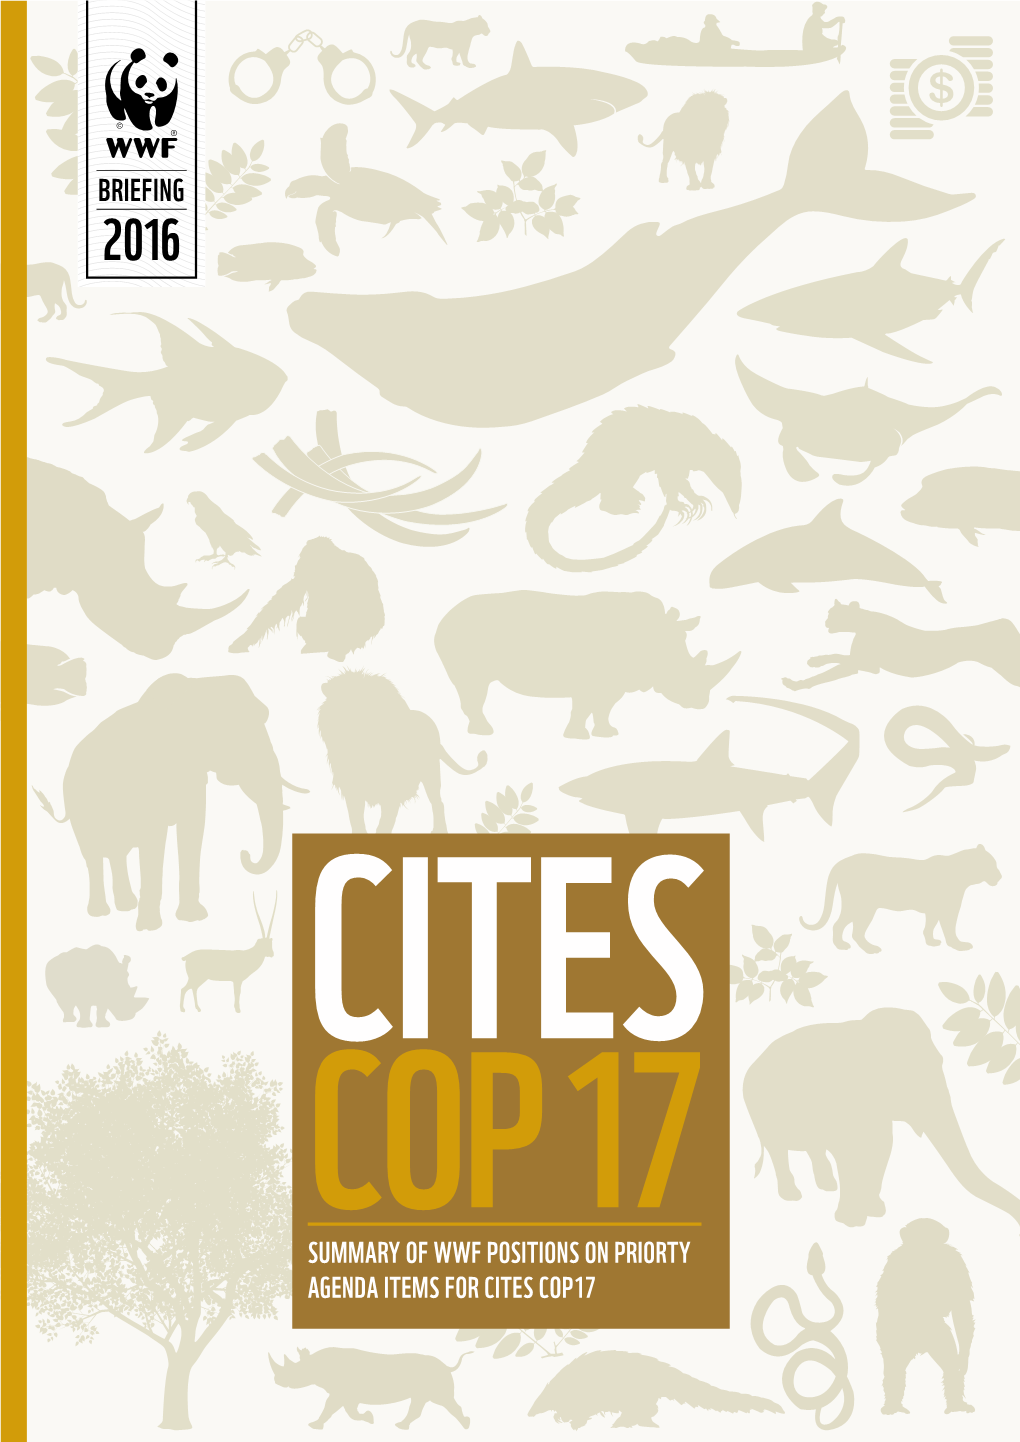 Cites Cop17 Summary of Wwf Positions on Priorty Agenda Items for Cites Cop17